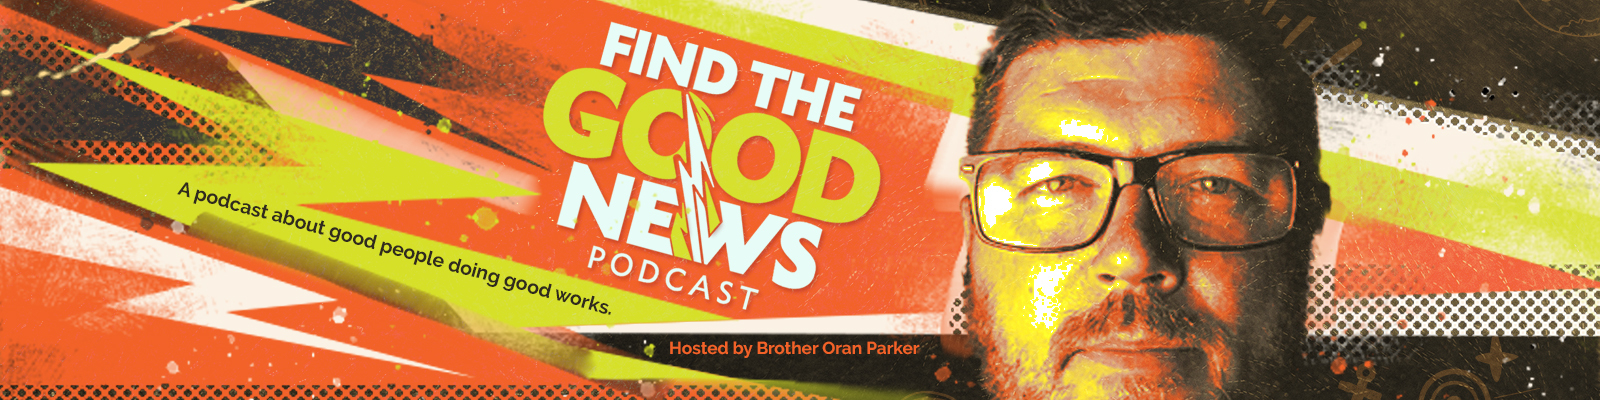 Find the Good News with Brother Oran Parker